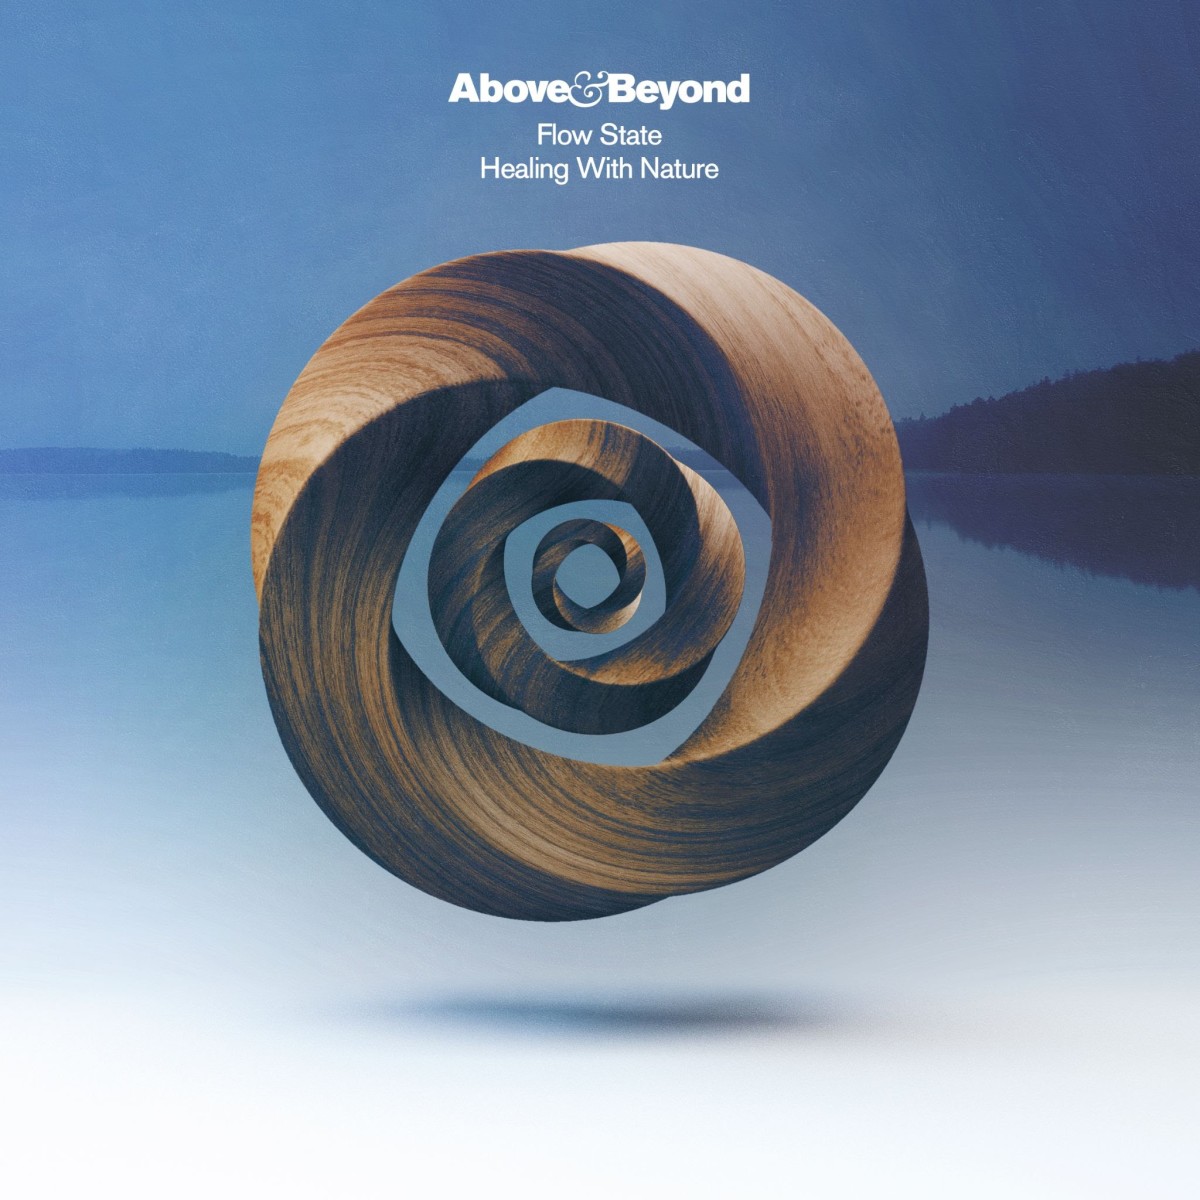 Flyer for Above & Beyond's "Flow State: Healing With Nature" album.